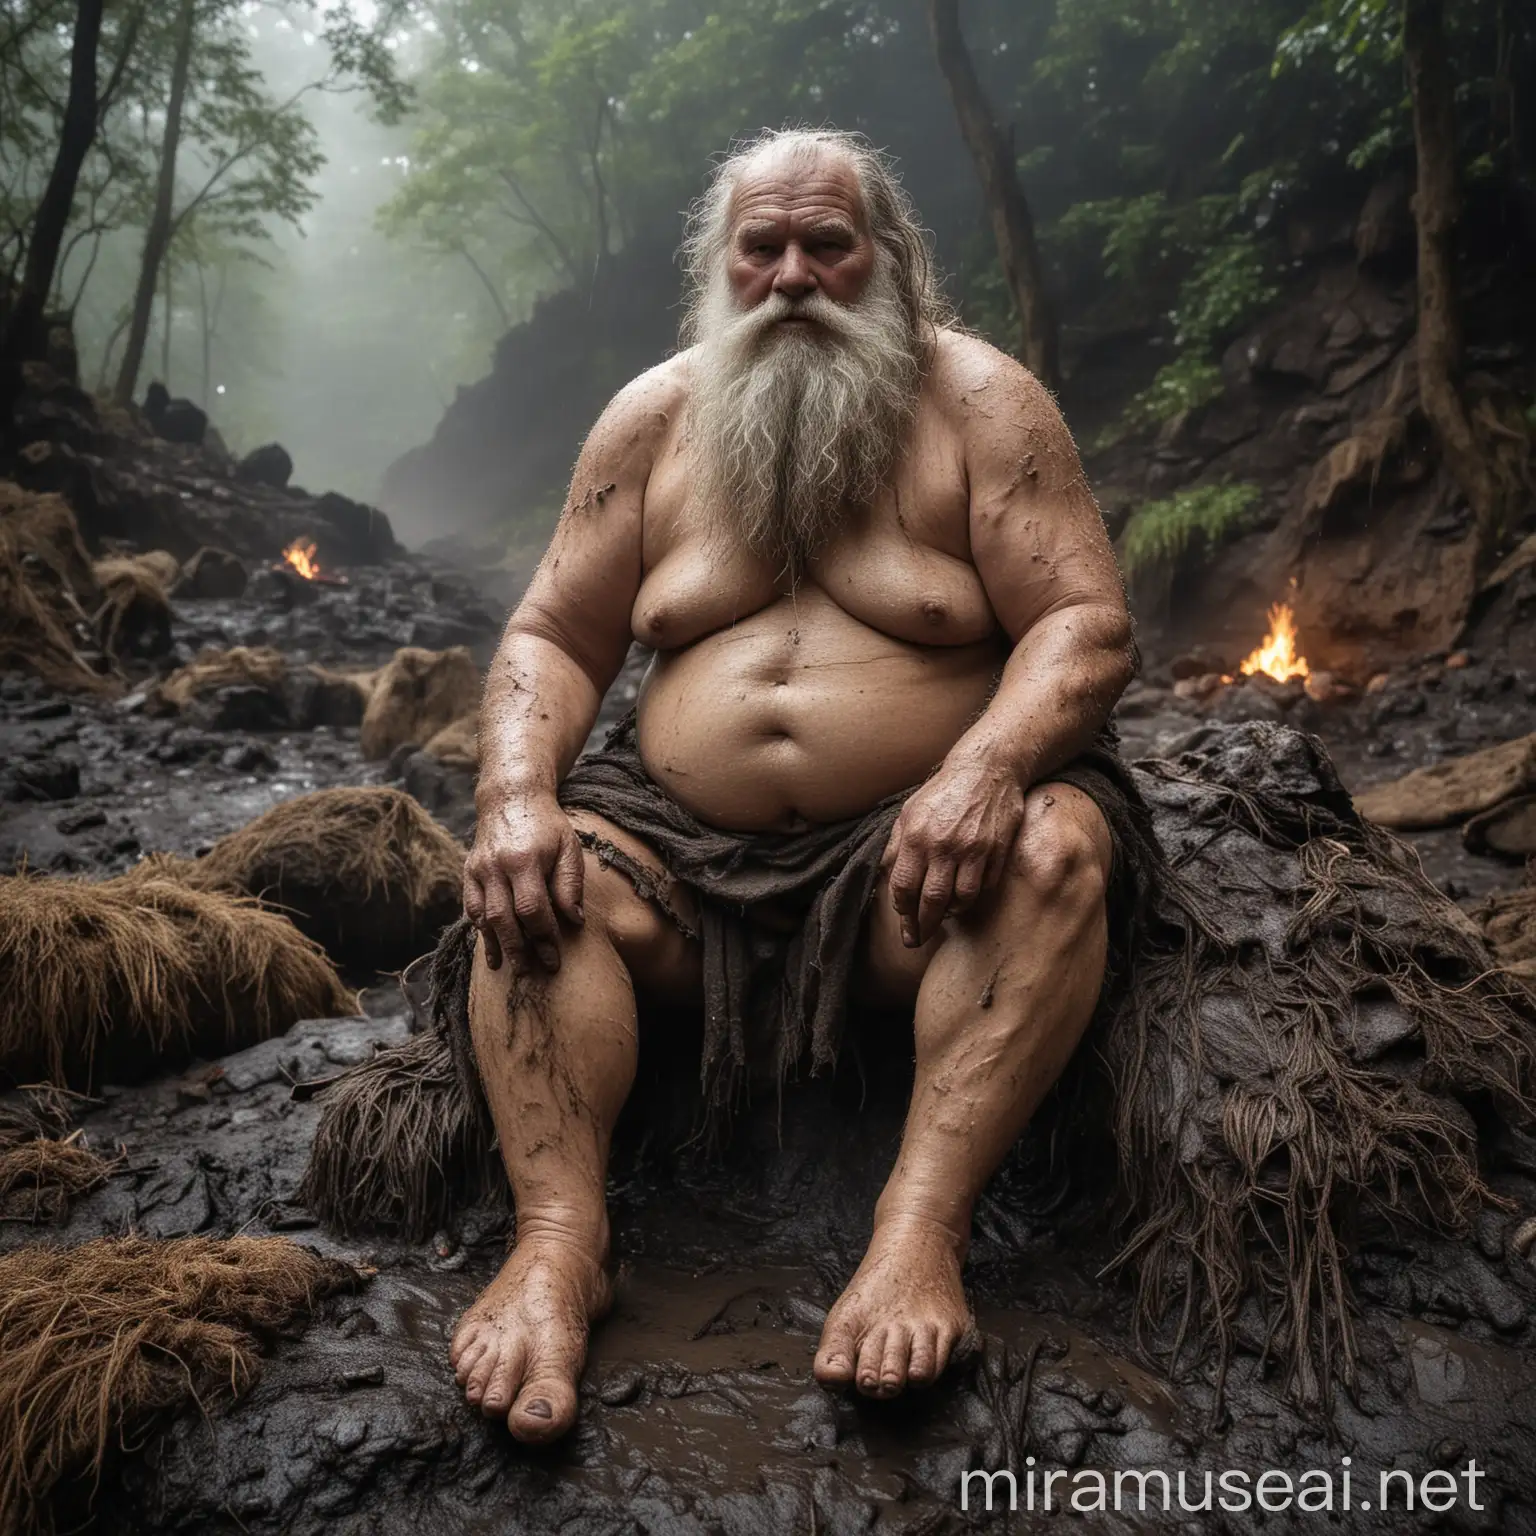 hill giant,forest cave,bonfire,large feet,large hand,fur loincloth,dumpy,chubby,primitive,hairy,long beard,old age,sitting on rock,rainy,wet dirty black mud cover hand and feet